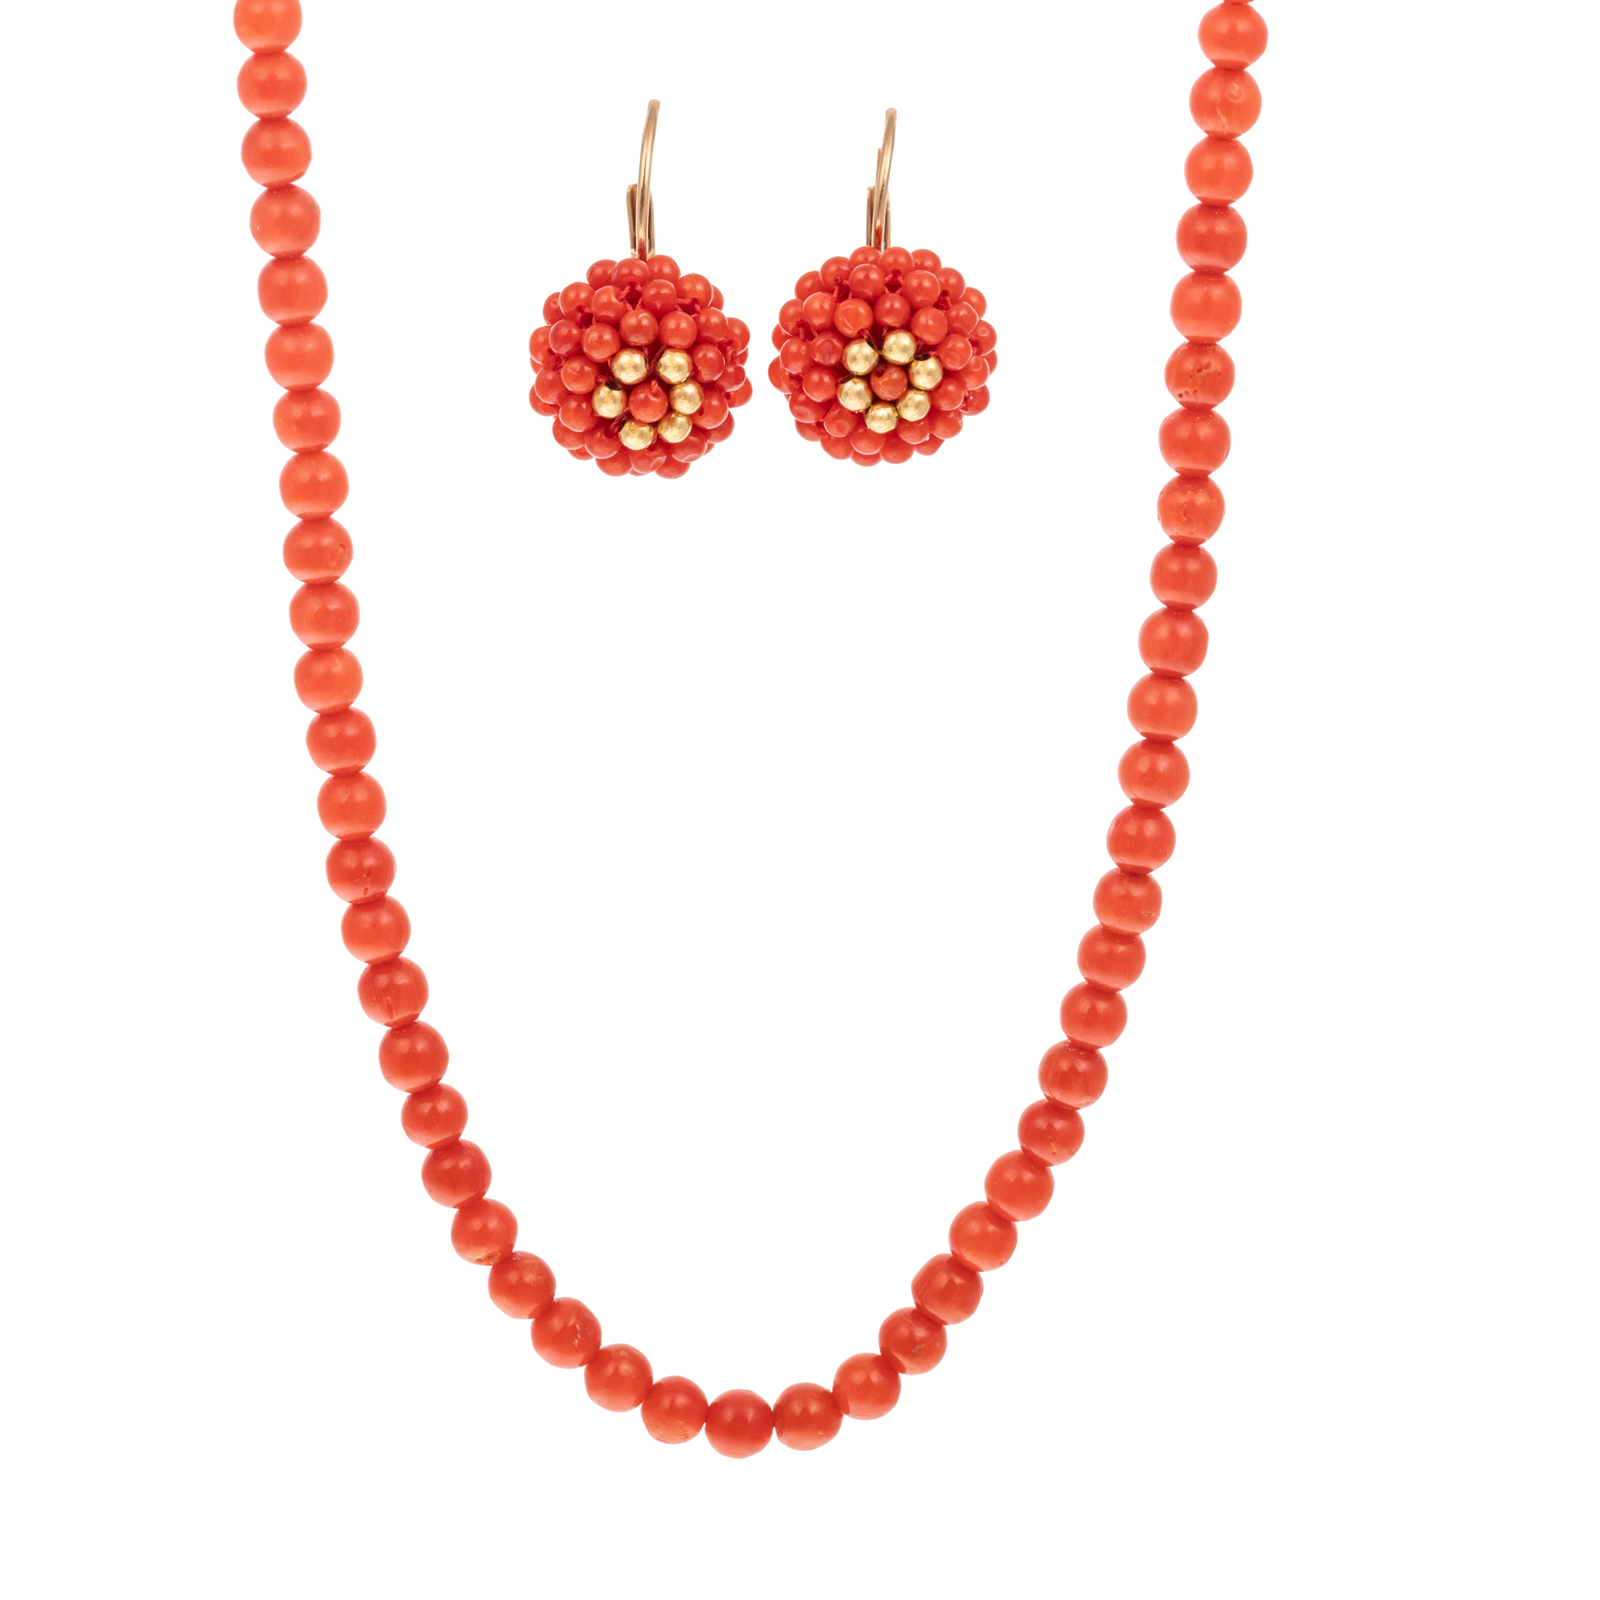 A CORAL BEADED NECKLACE EARRINGS 2ead3b